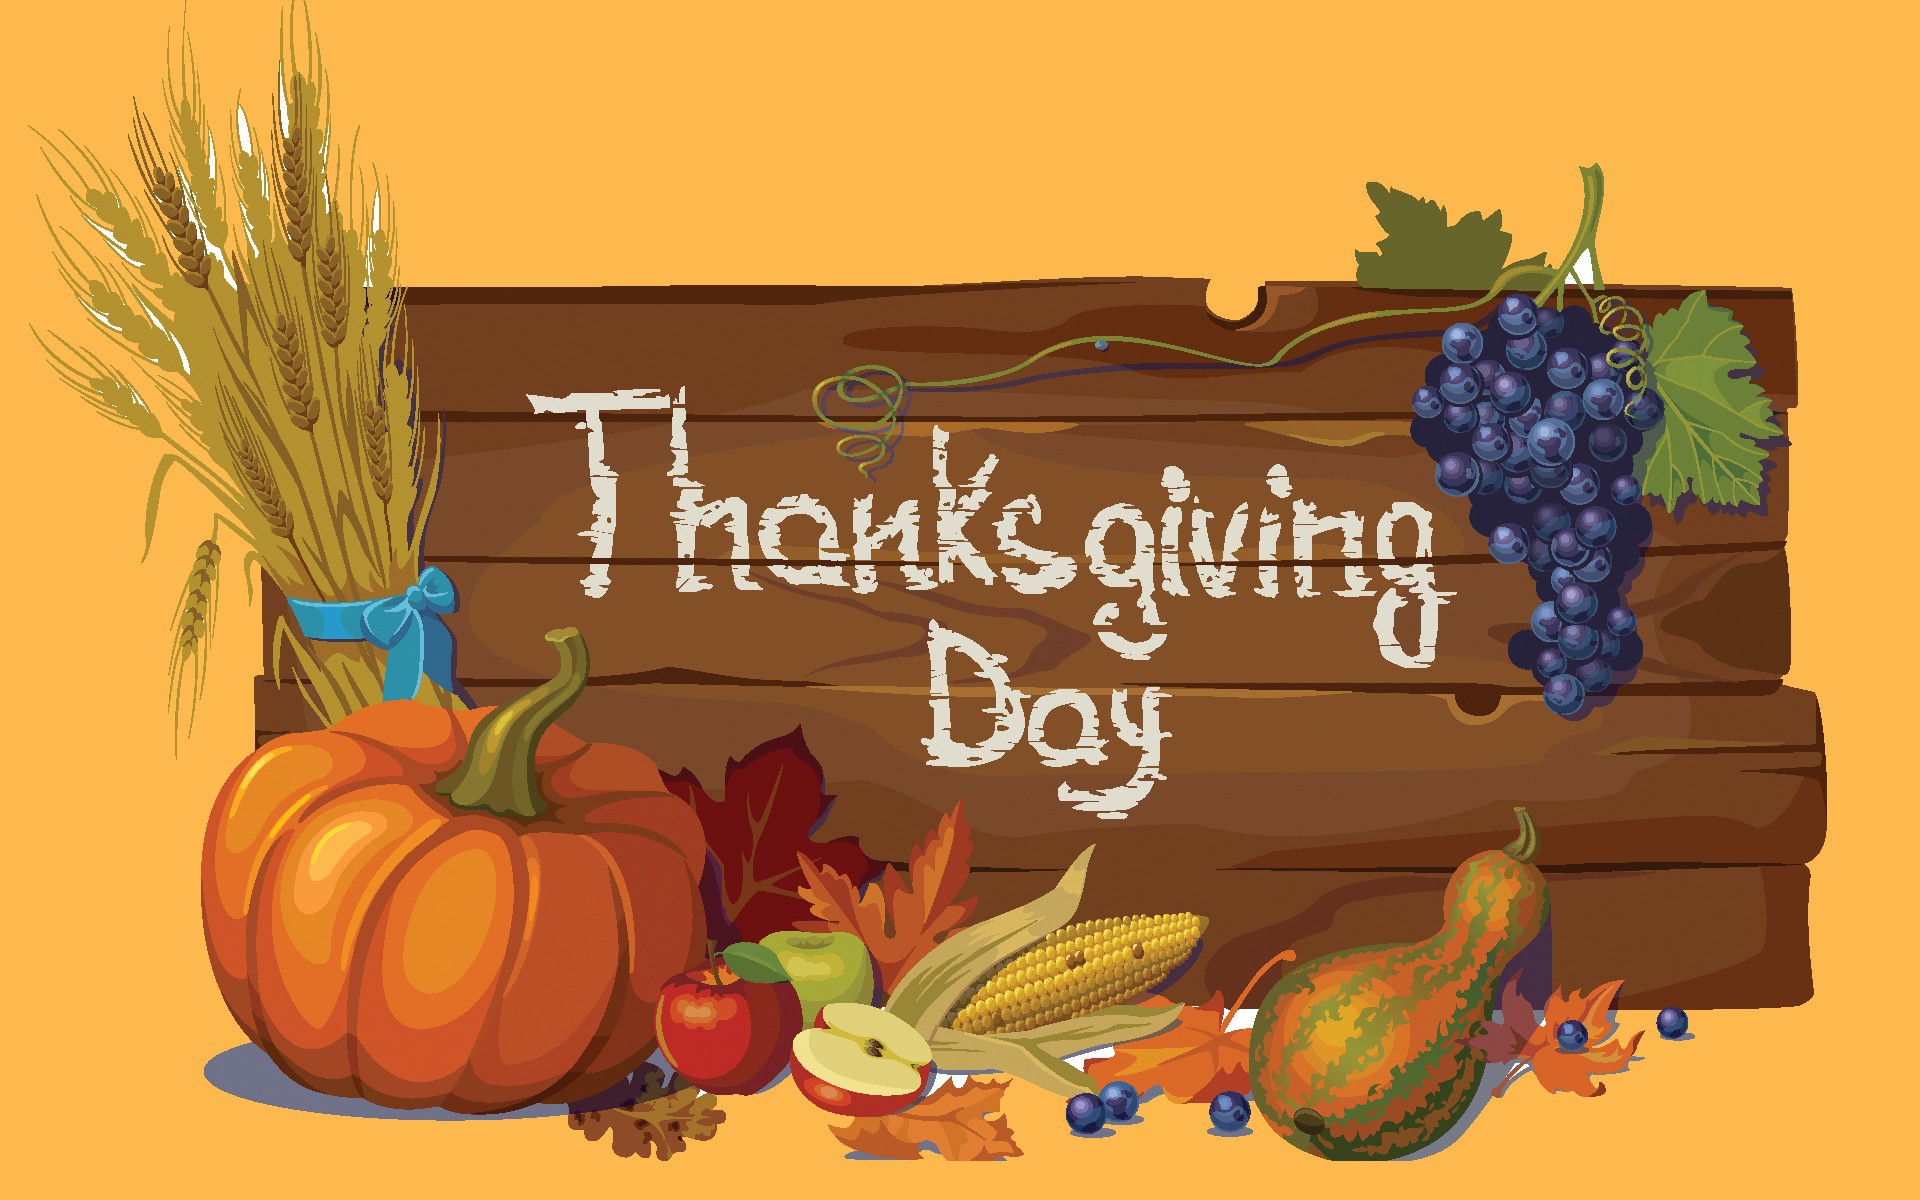 Happy Thanksgiving Day Images, Wallpapers & Pictures 2017